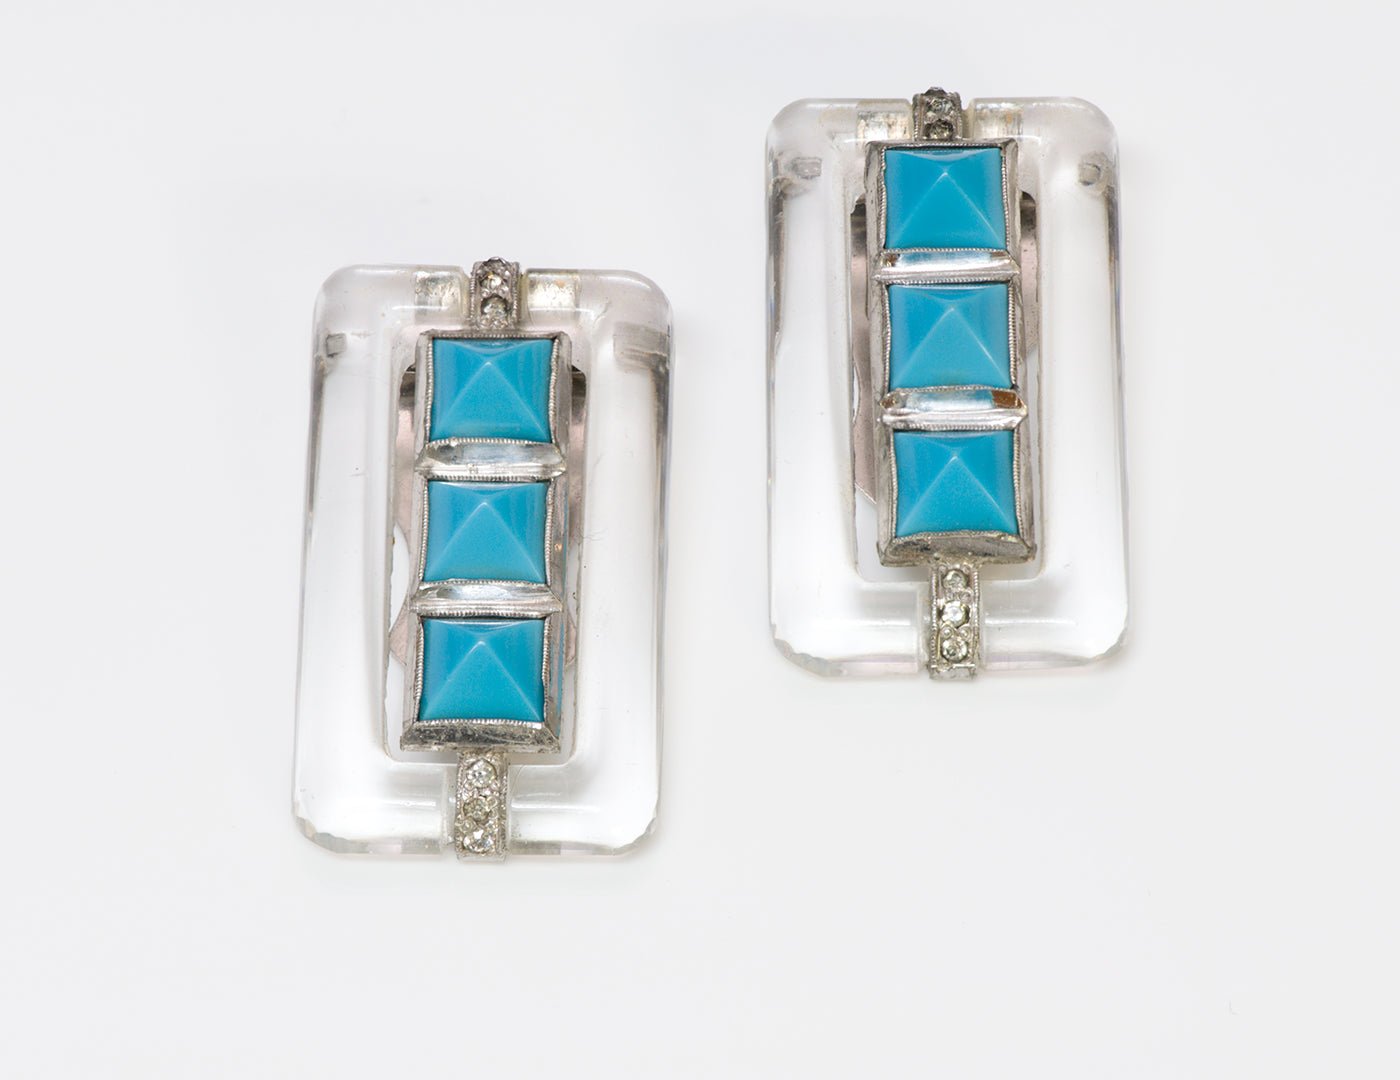 Trifari Alfred Philippe Art Deco Faux Turquoise Crystal Clips